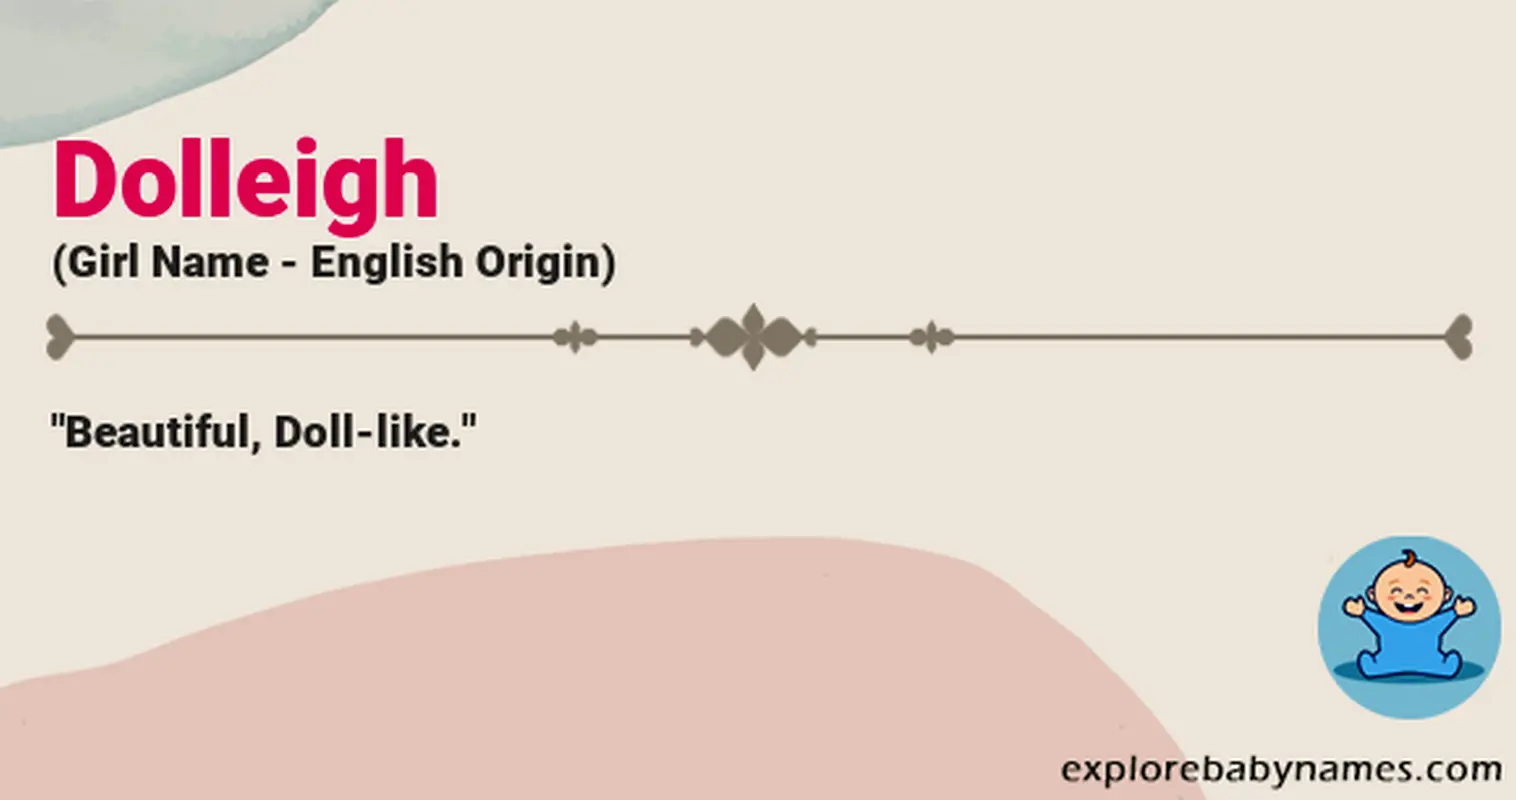 Meaning of Dolleigh